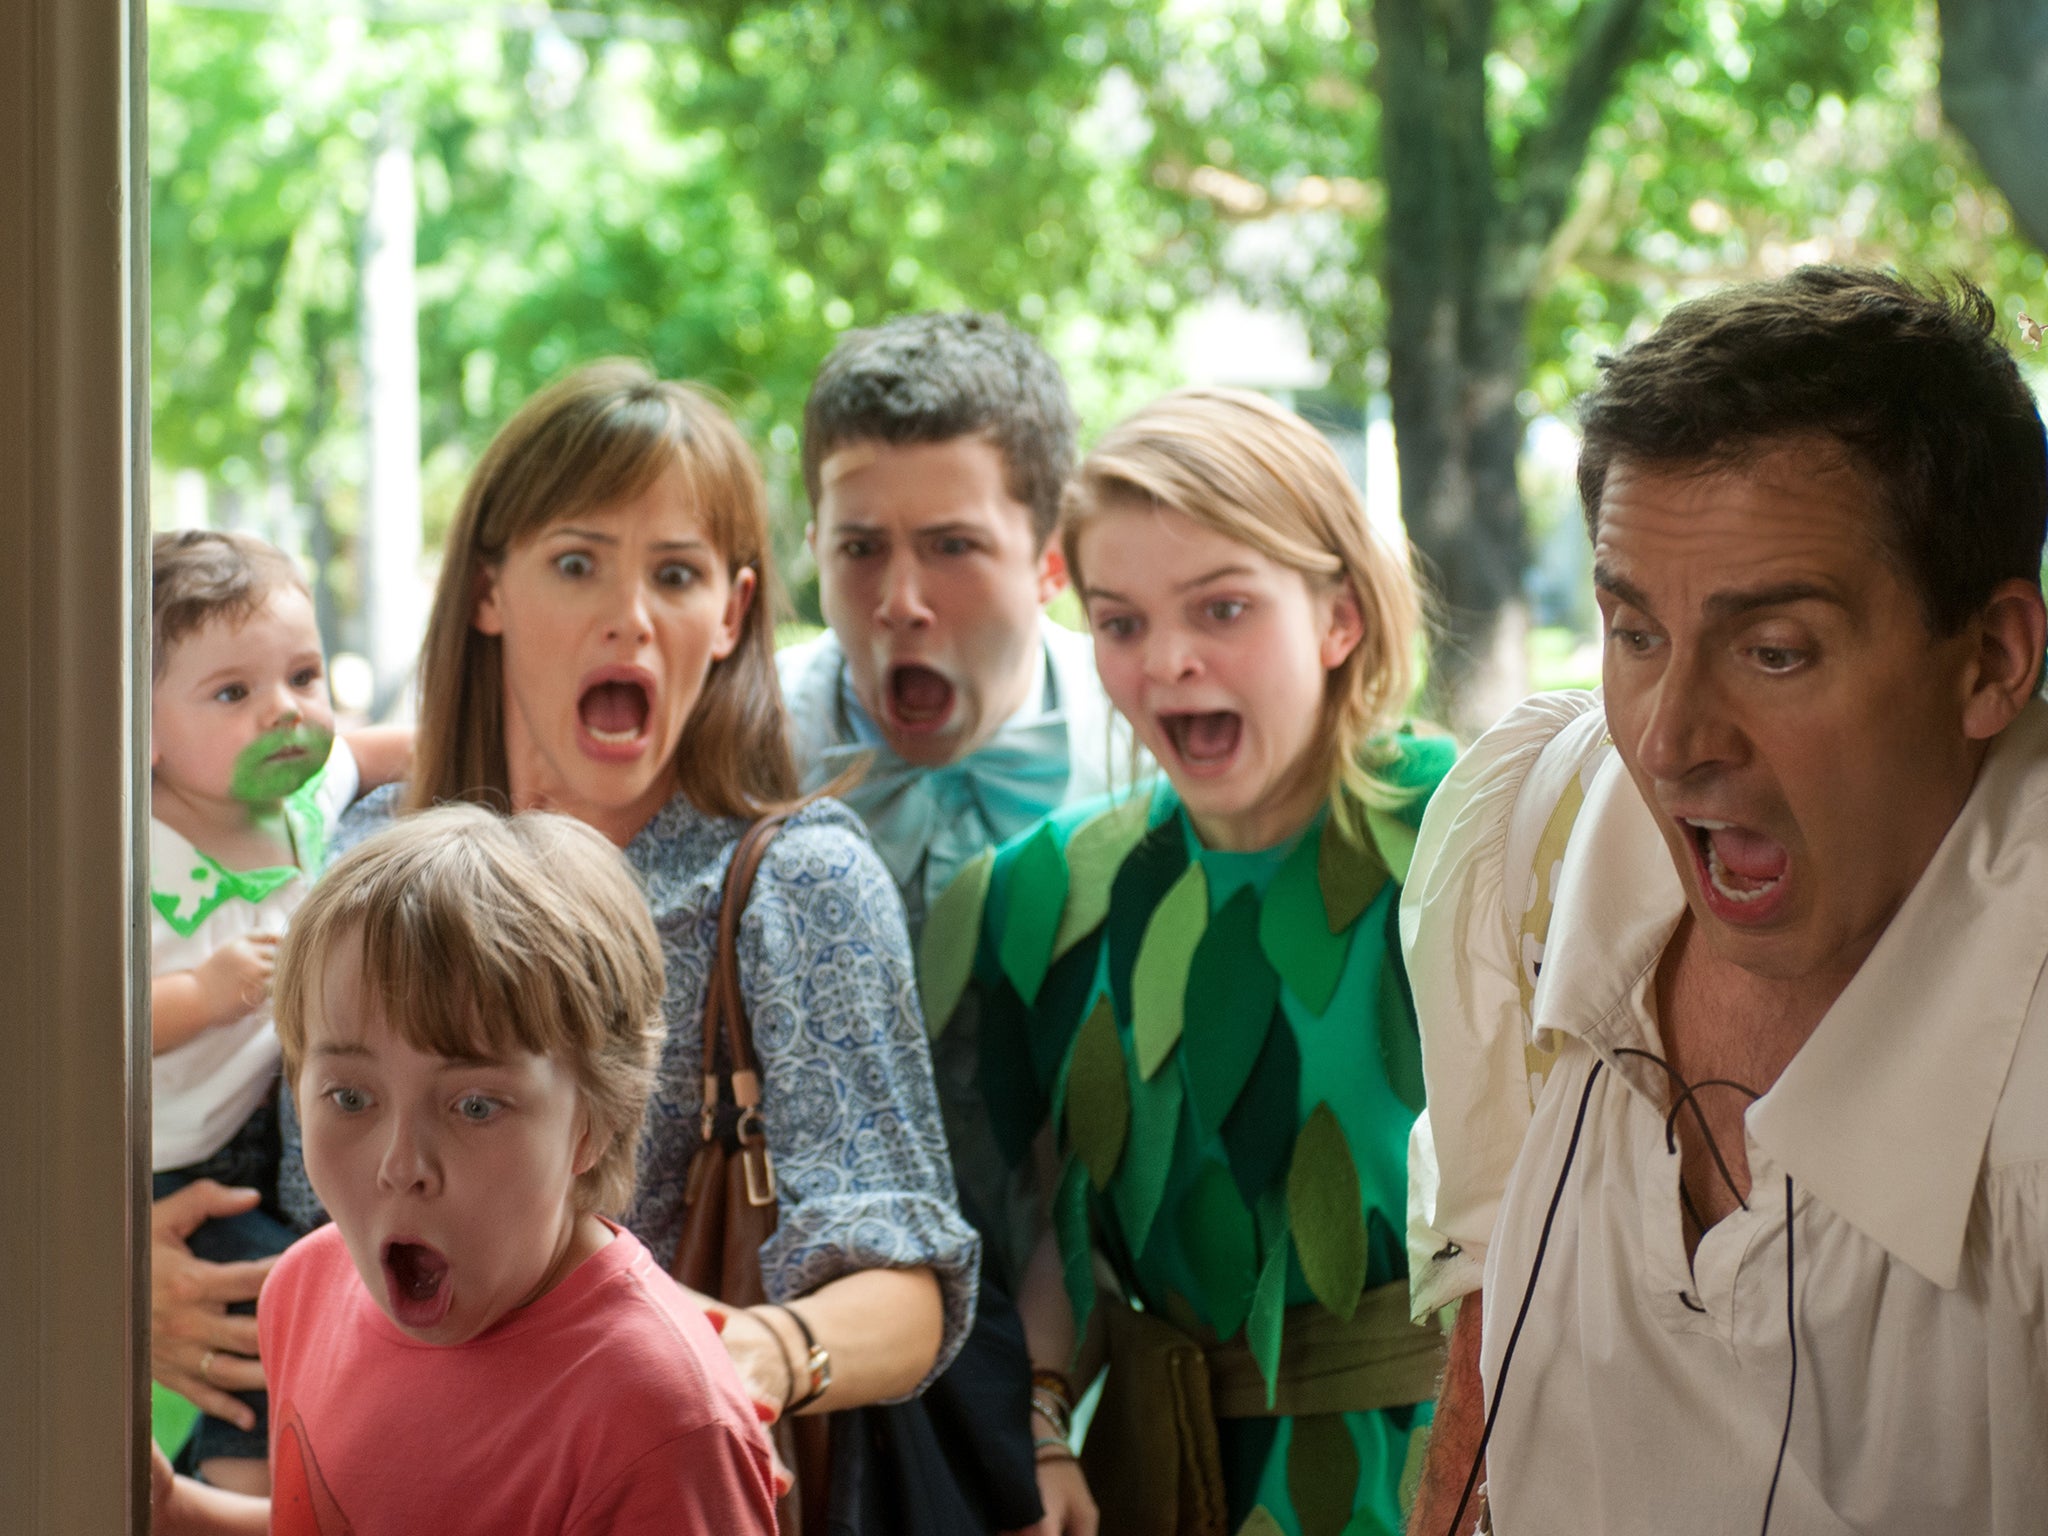 Jennifer Garner and Steve Carell in ‘Alexander and the Terrible, Horrible, No Good, Very Bad Day’